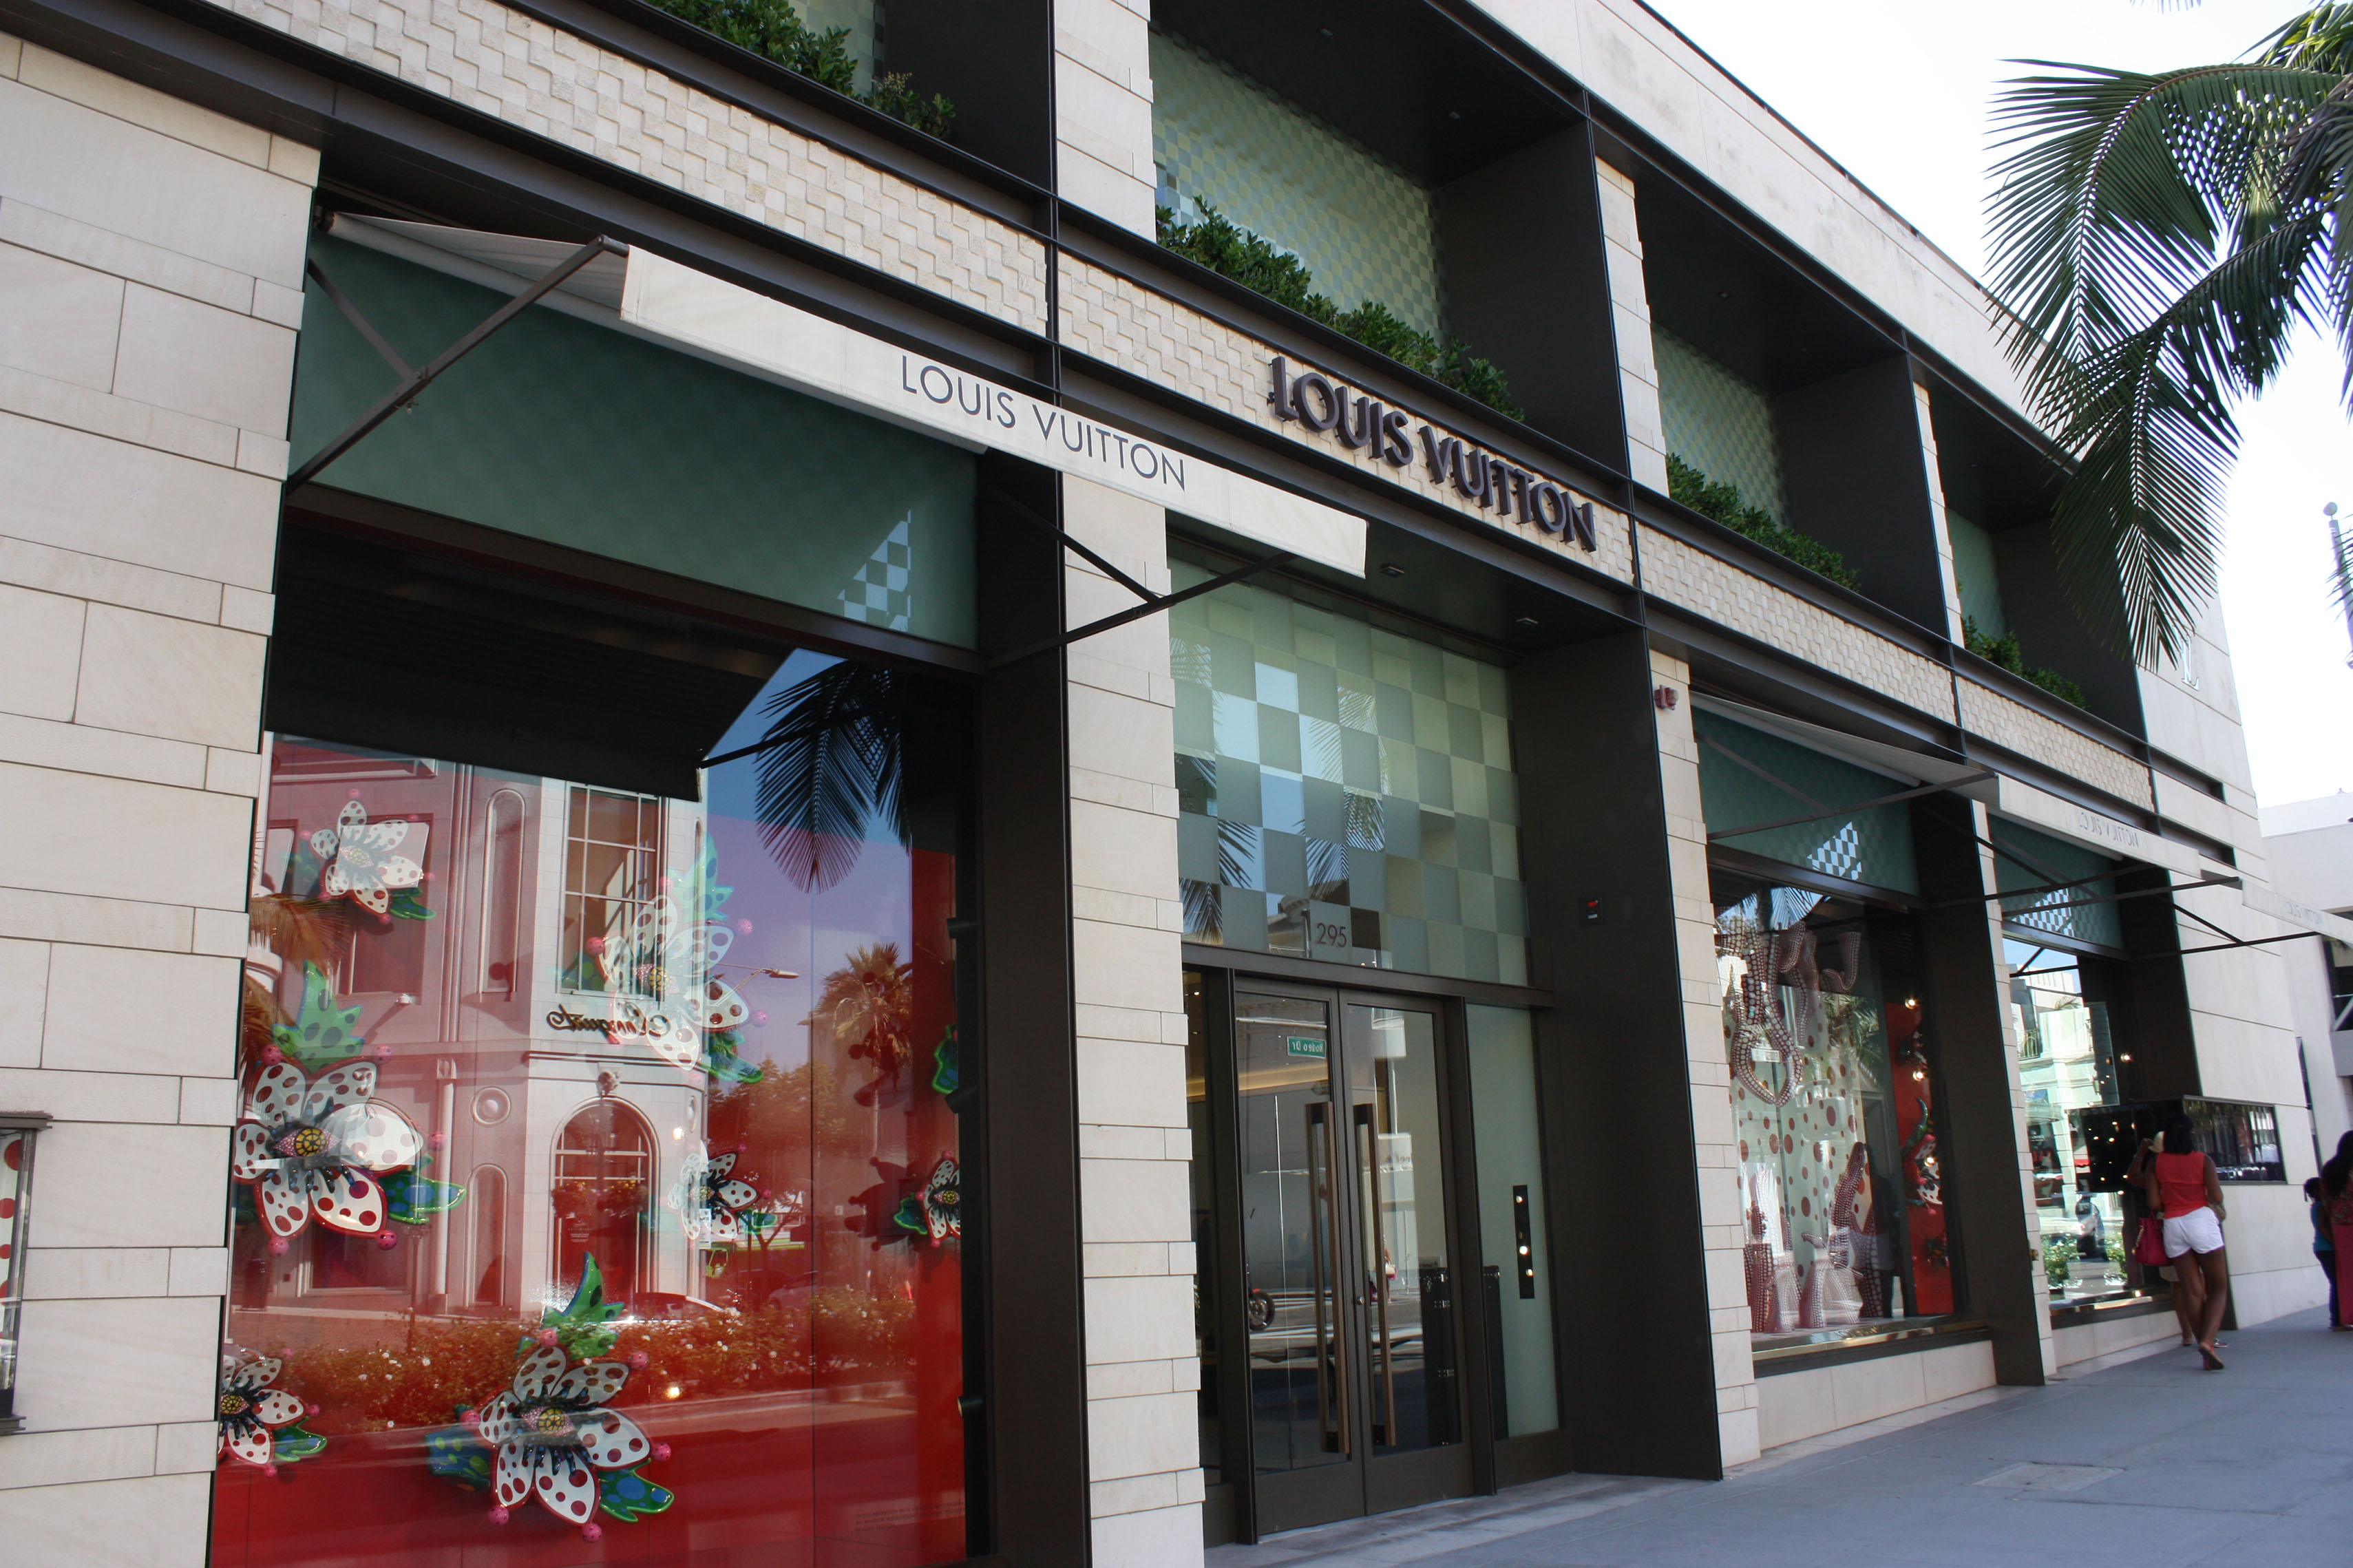 Louis Vuitton Store at Rodeo Drive in Beverly Hills - CALIFORNIA